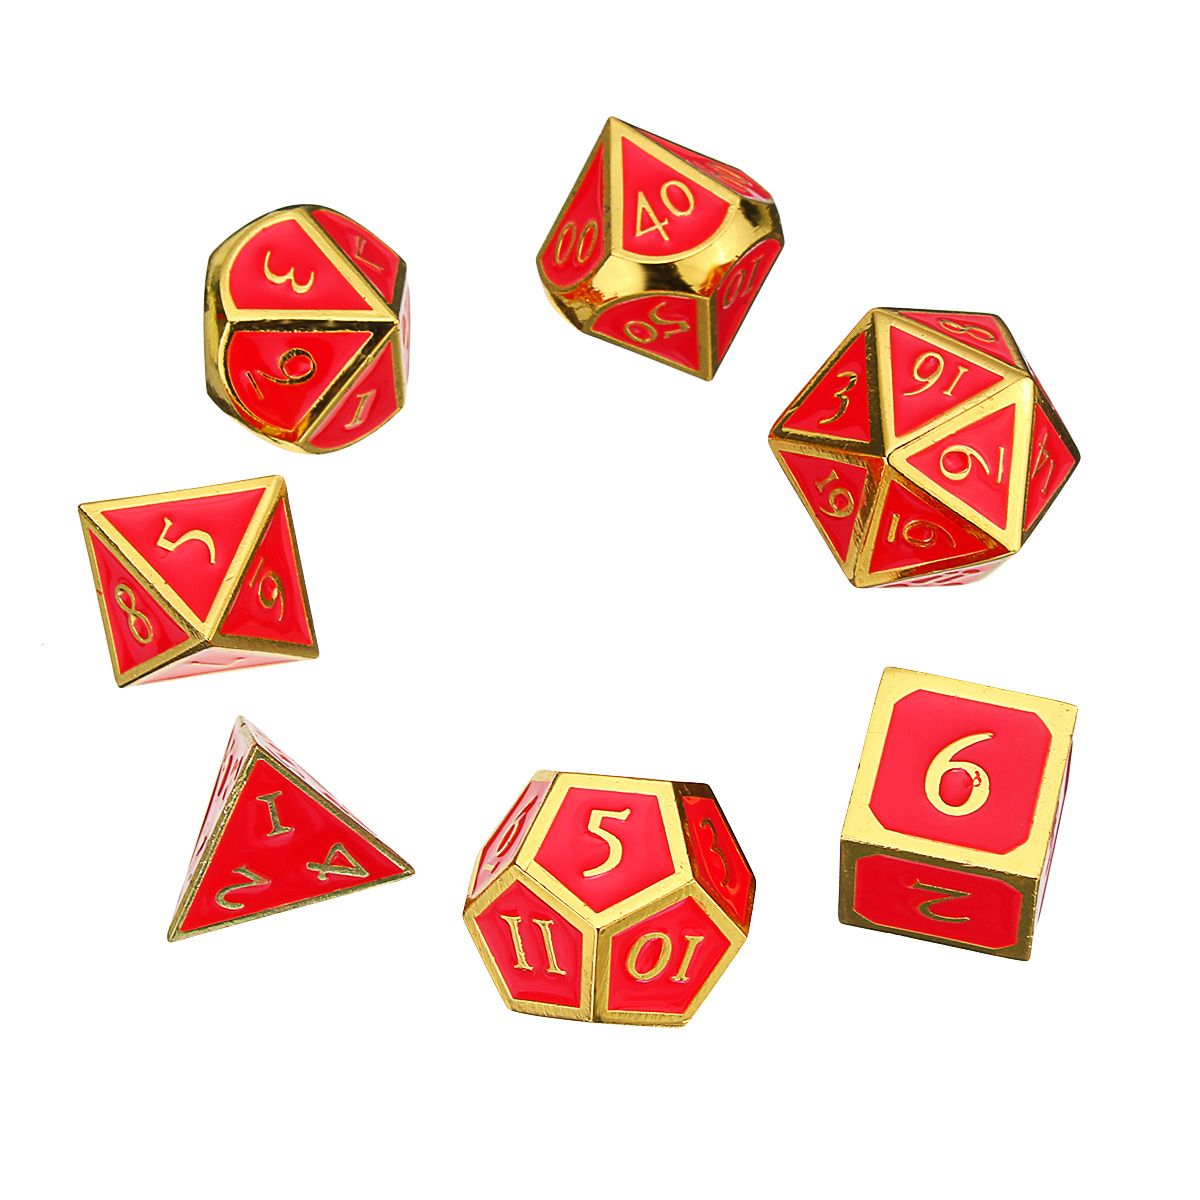 7Pc-Solid-Metal-Heavy-Dice-Set-Polyhedral-Dice-Role-Playing-Games-Dices-Gadget-RPG-Dices-Set-1414782